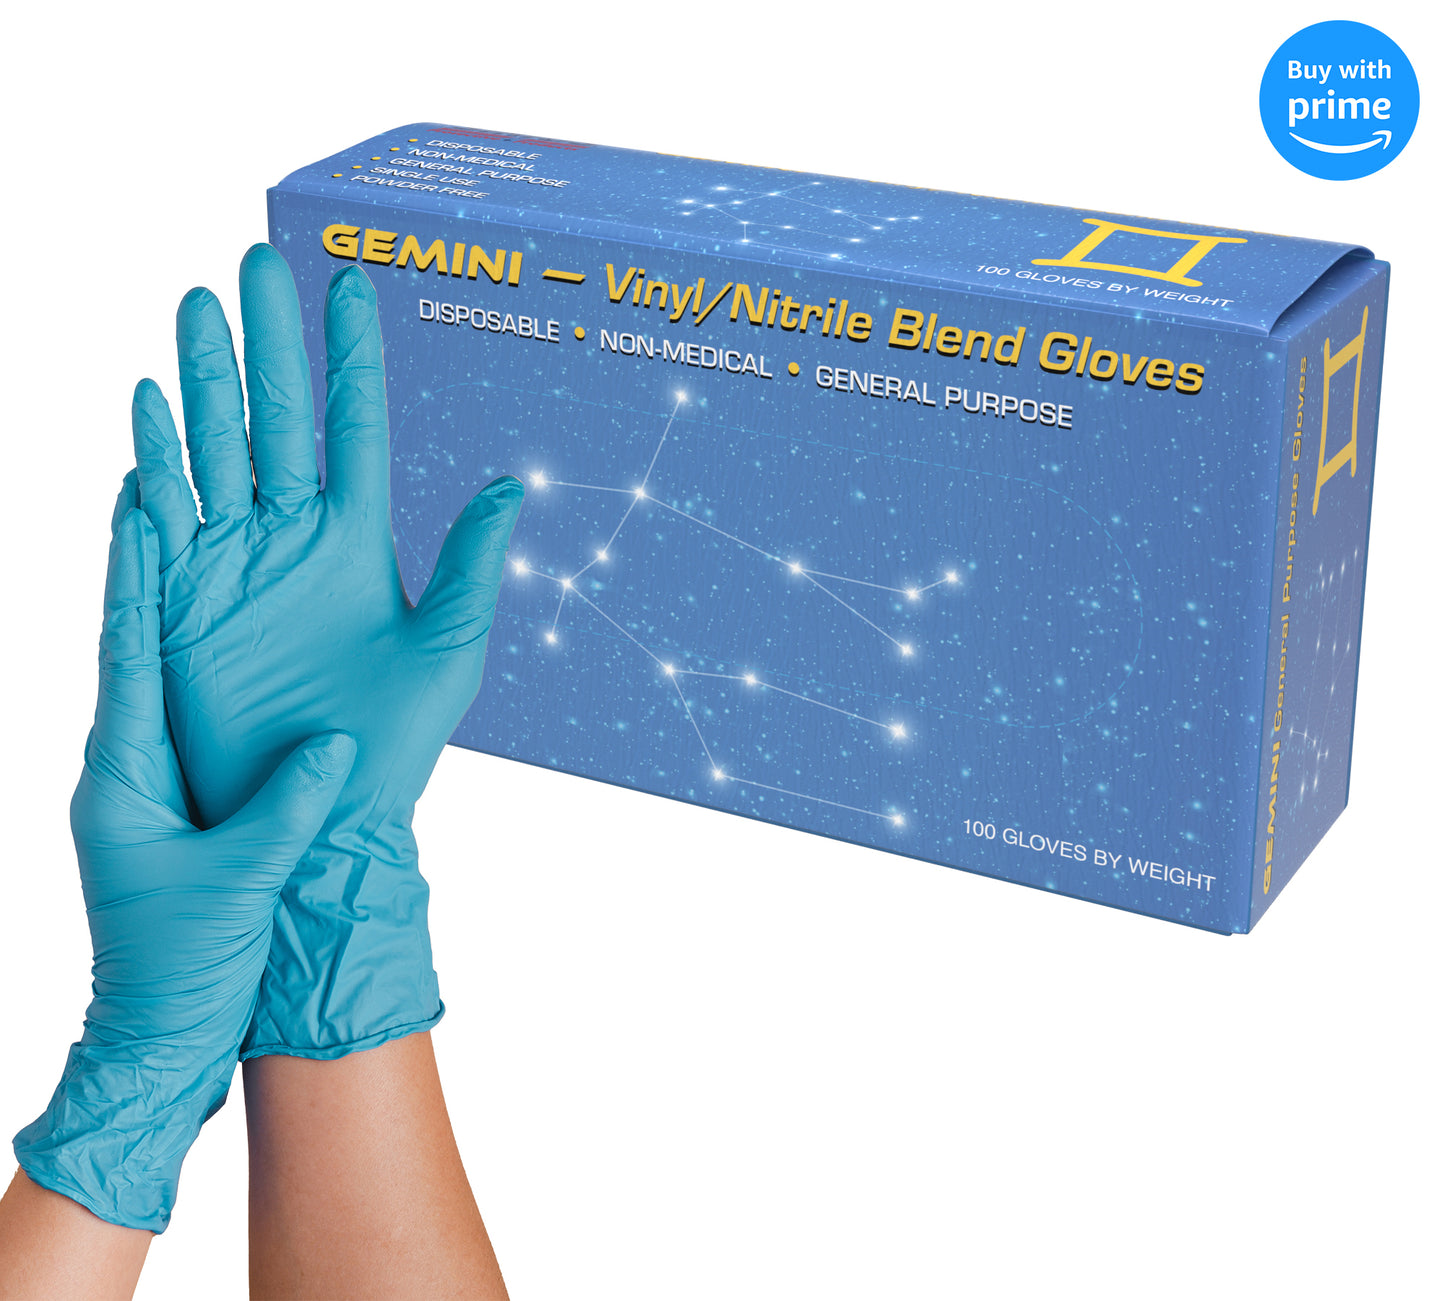 Gemini Disposable Food Prep Gloves – Blue Nitrile Vinyl Blend Glove, Latex Free, For Cleaning, Cooking, Kitchen, Tattoo